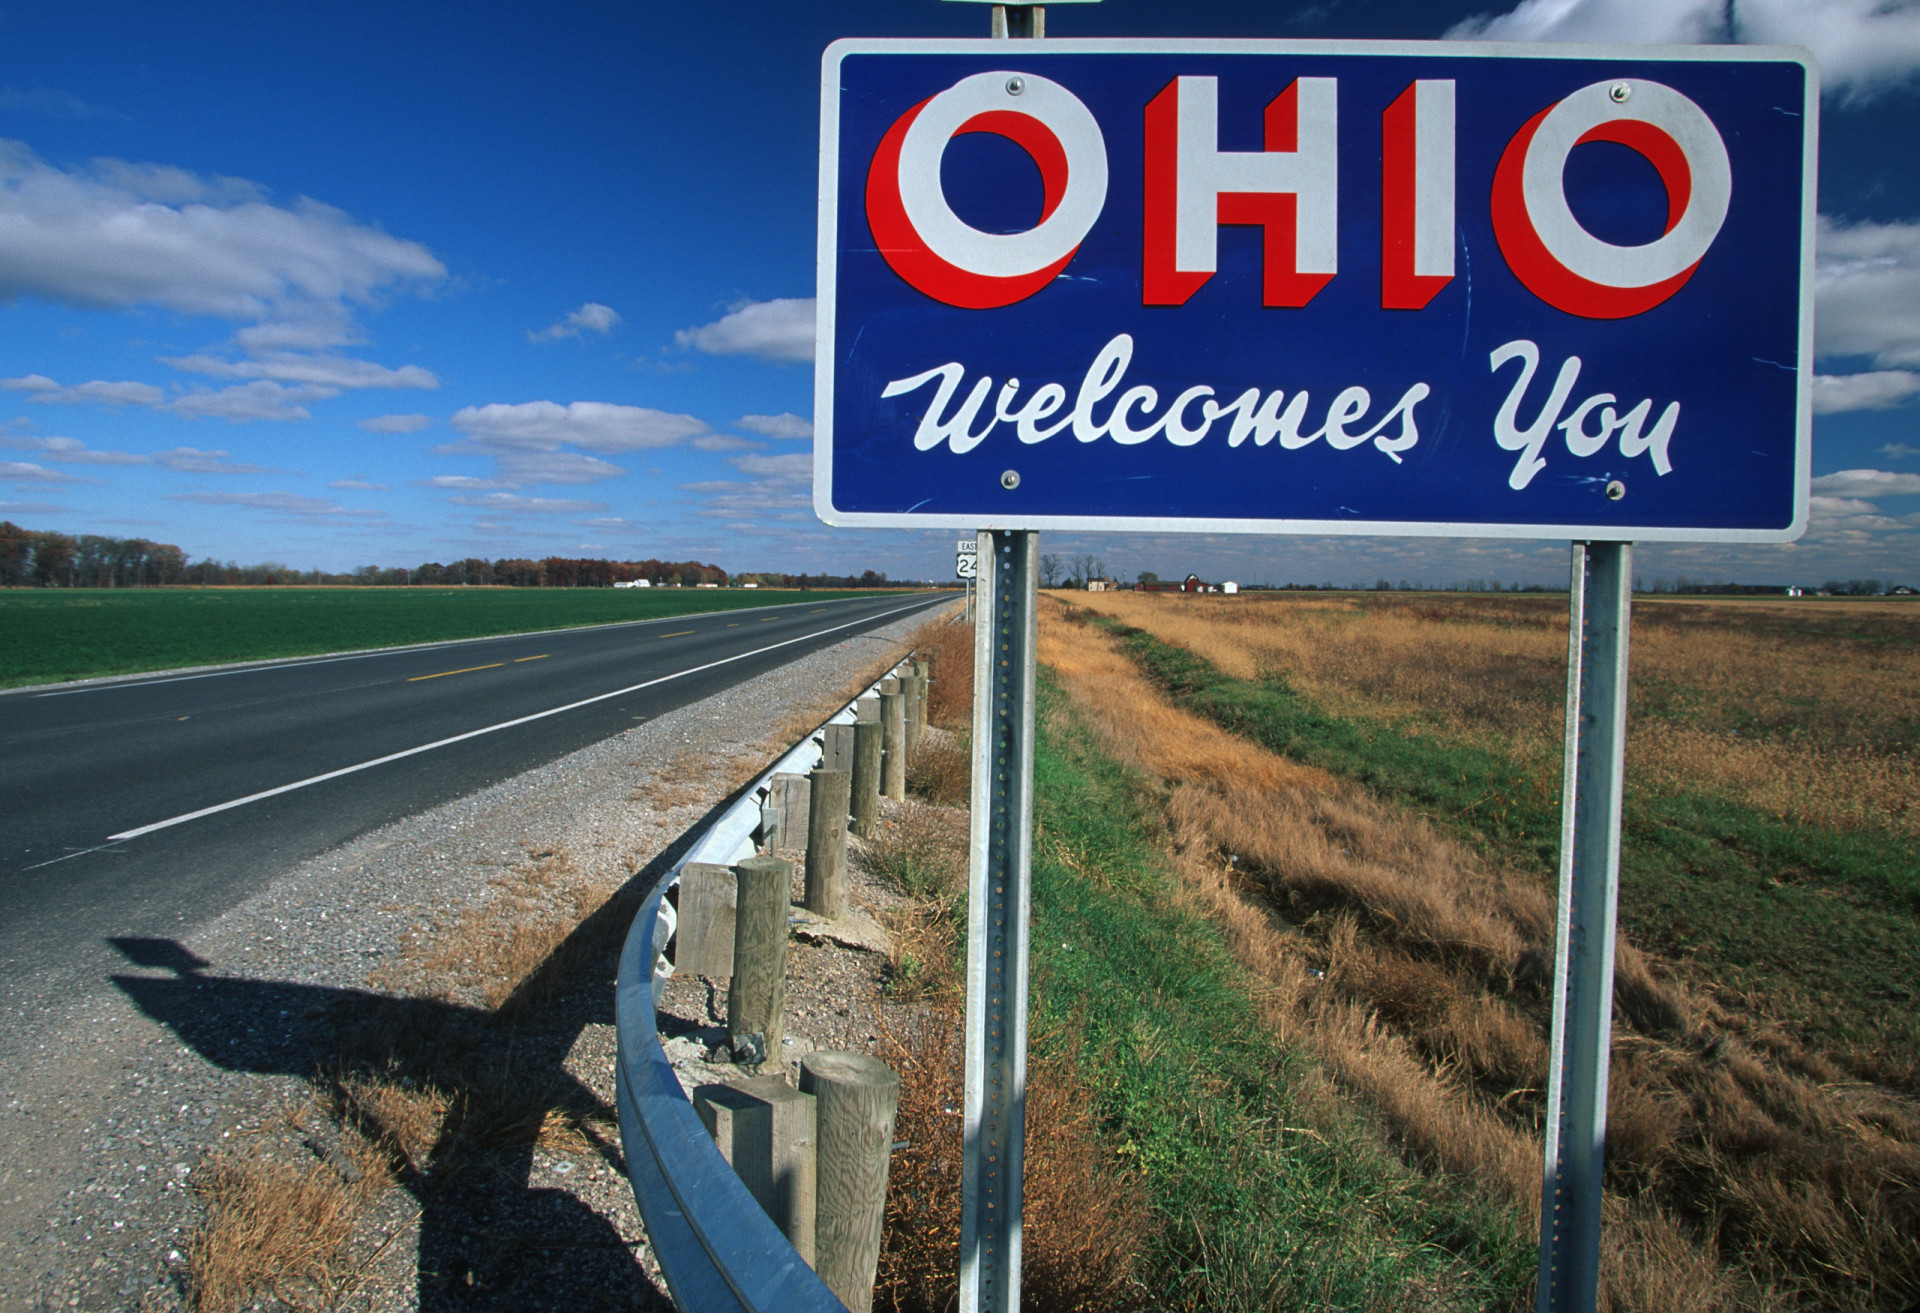 <p>The Buckeye State keeps it simple with this sign. Ohio is the birthplace of seven United States presidents.</p><p><a href="https://www.msn.com/en-us/community/channel/vid-7xx8mnucu55yw63we9va2gwr7uihbxwc68fxqp25x6tg4ftibpra?cvid=94631541bc0f4f89bfd59158d696ad7e">Follow us and access great exclusive content every day</a></p>